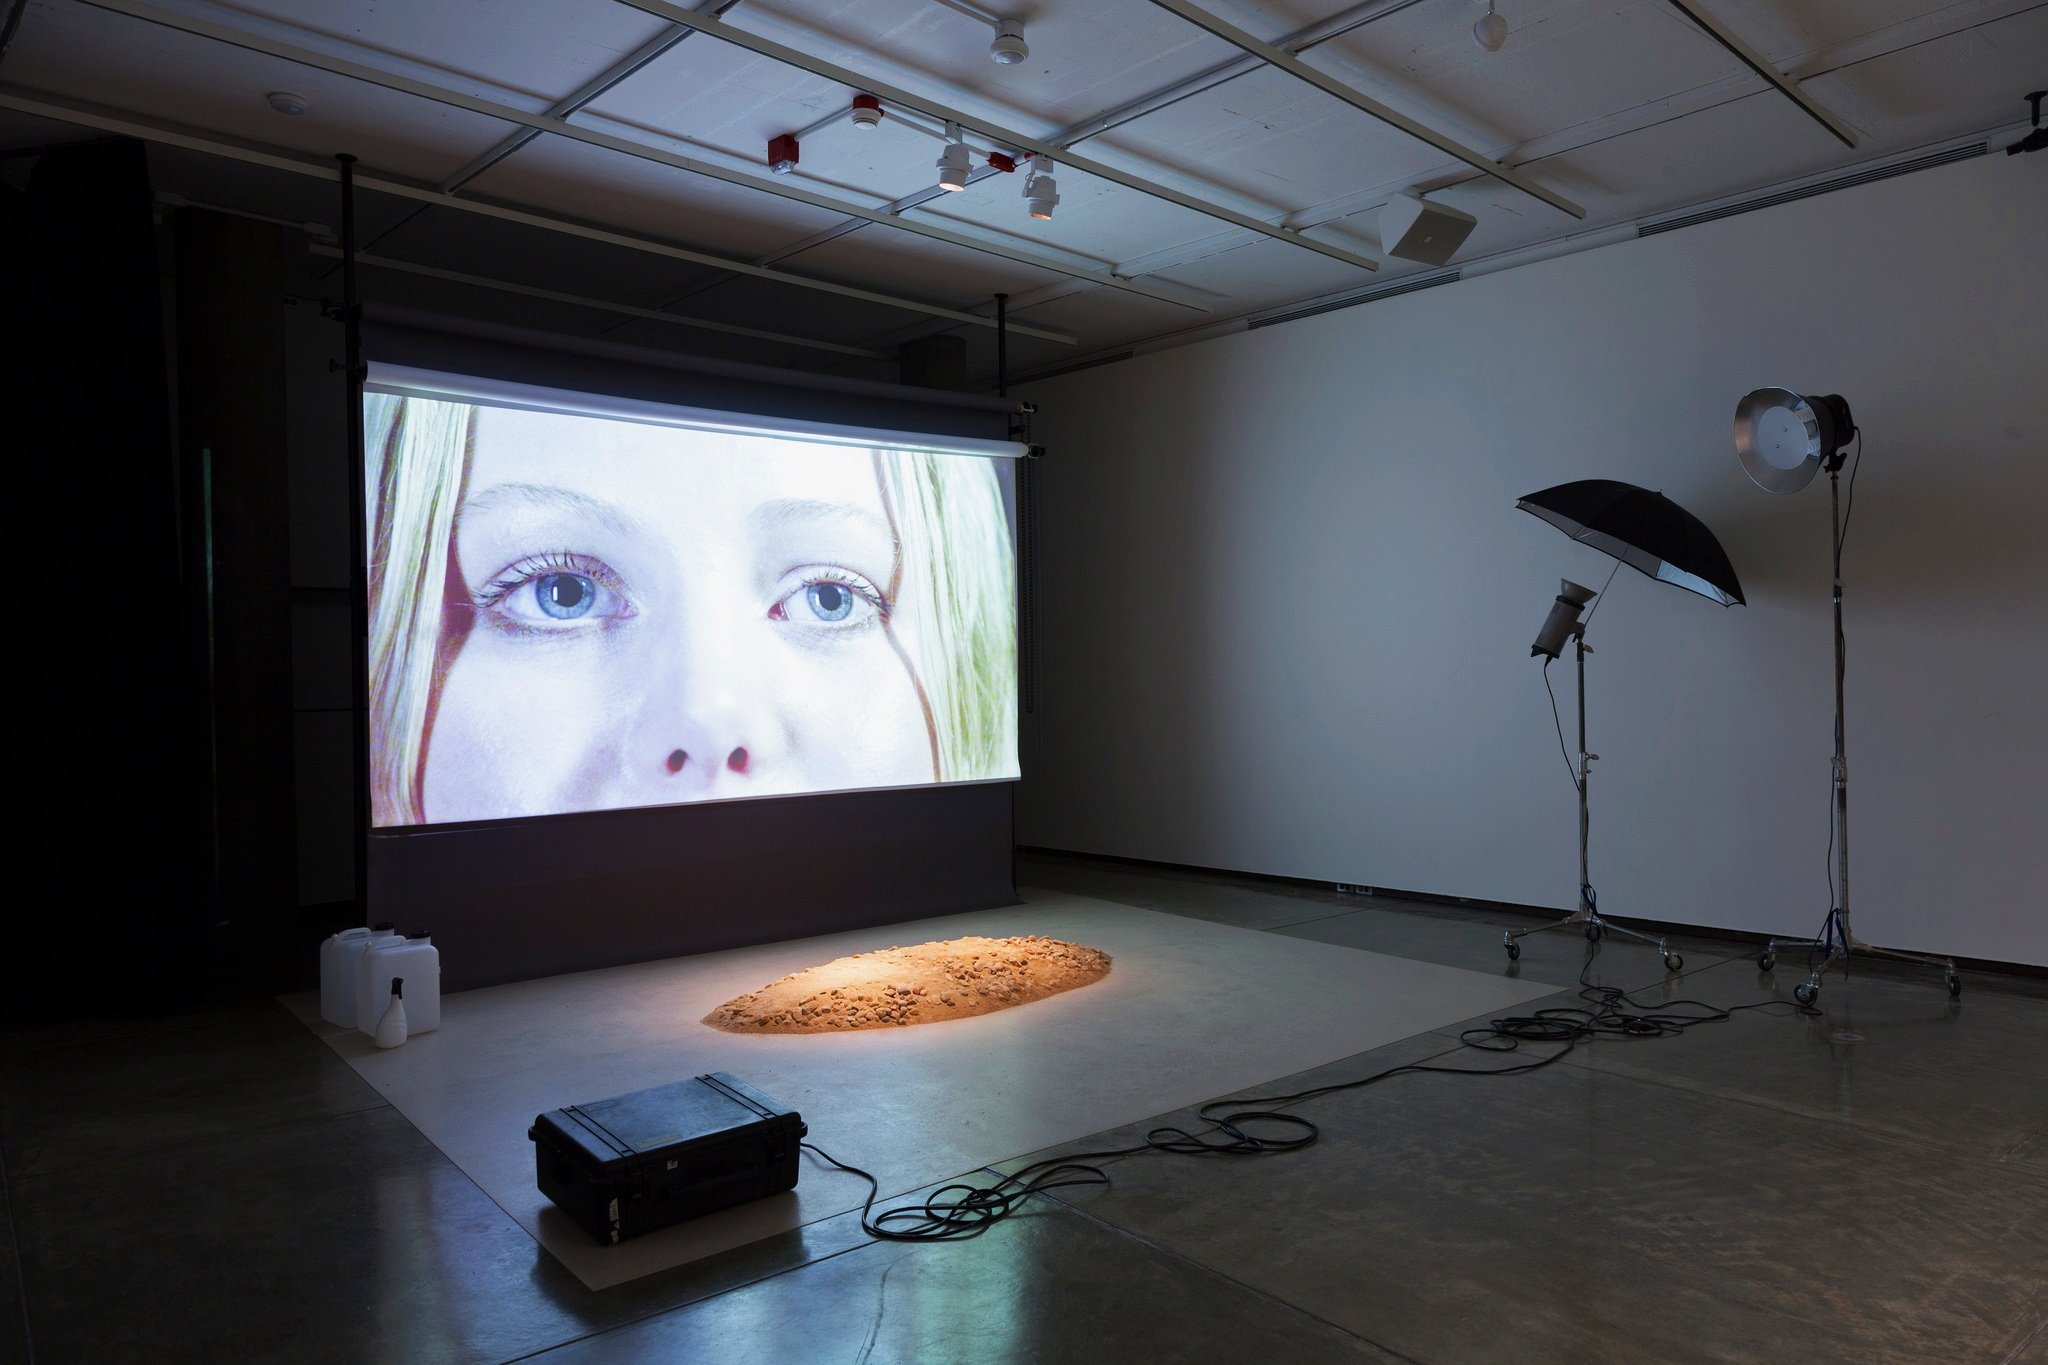  Simon Fujiwara,  Studio Pietà (King Kong Komplex) , 2013, mixed media installation with video projection, duration: 20:30, dimensions variable. Courtesy of the artist. 